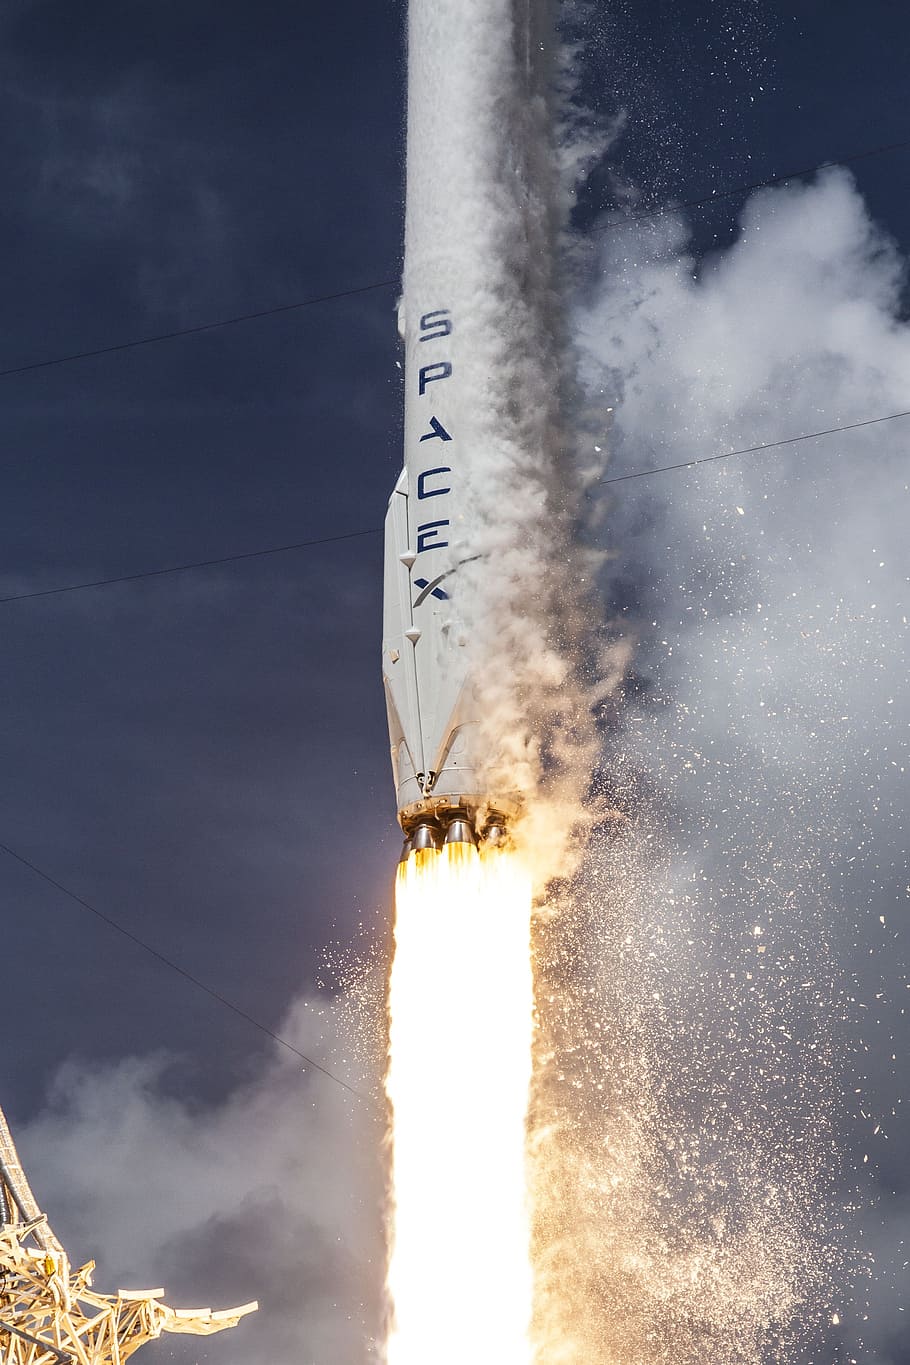 white, spacex space shuttle, launching, rocket launch, spacex, lift-off, launch, flames, propulsion, space